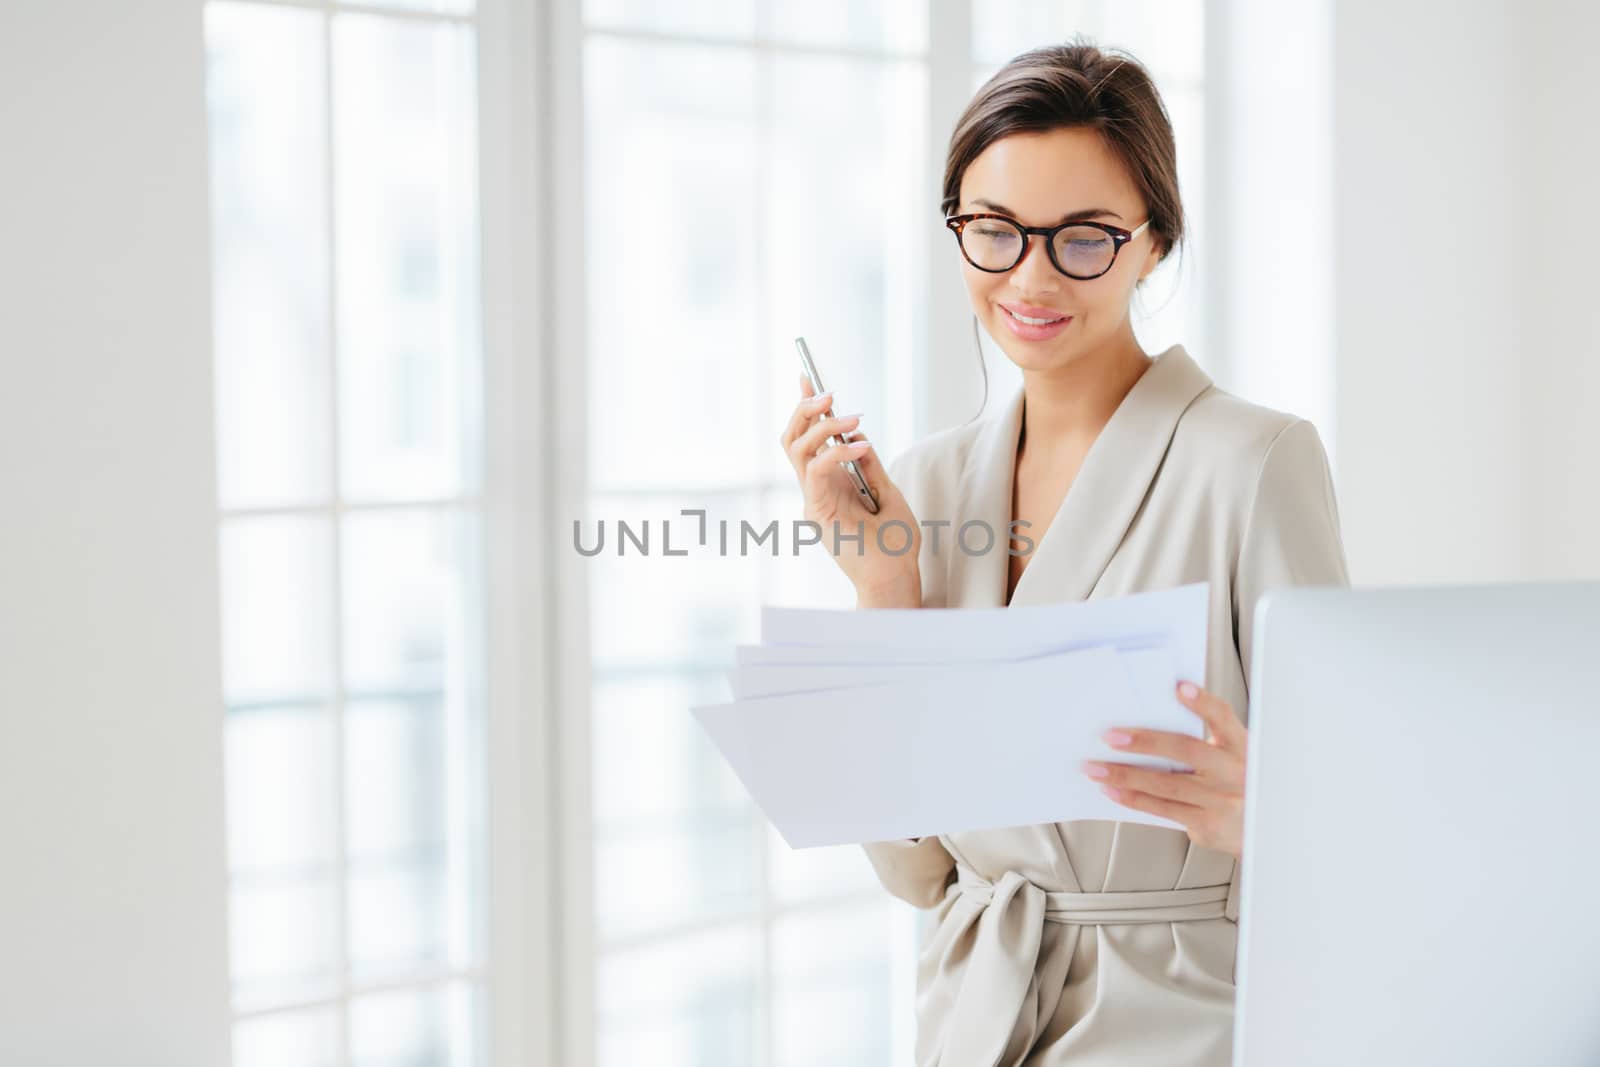 Photo of satisfied young woman with dark hair dressed in business suit, focused in papers, works in office, holds modern cellphone, wears optical glasses for good vision, has pleased expression by vkstock